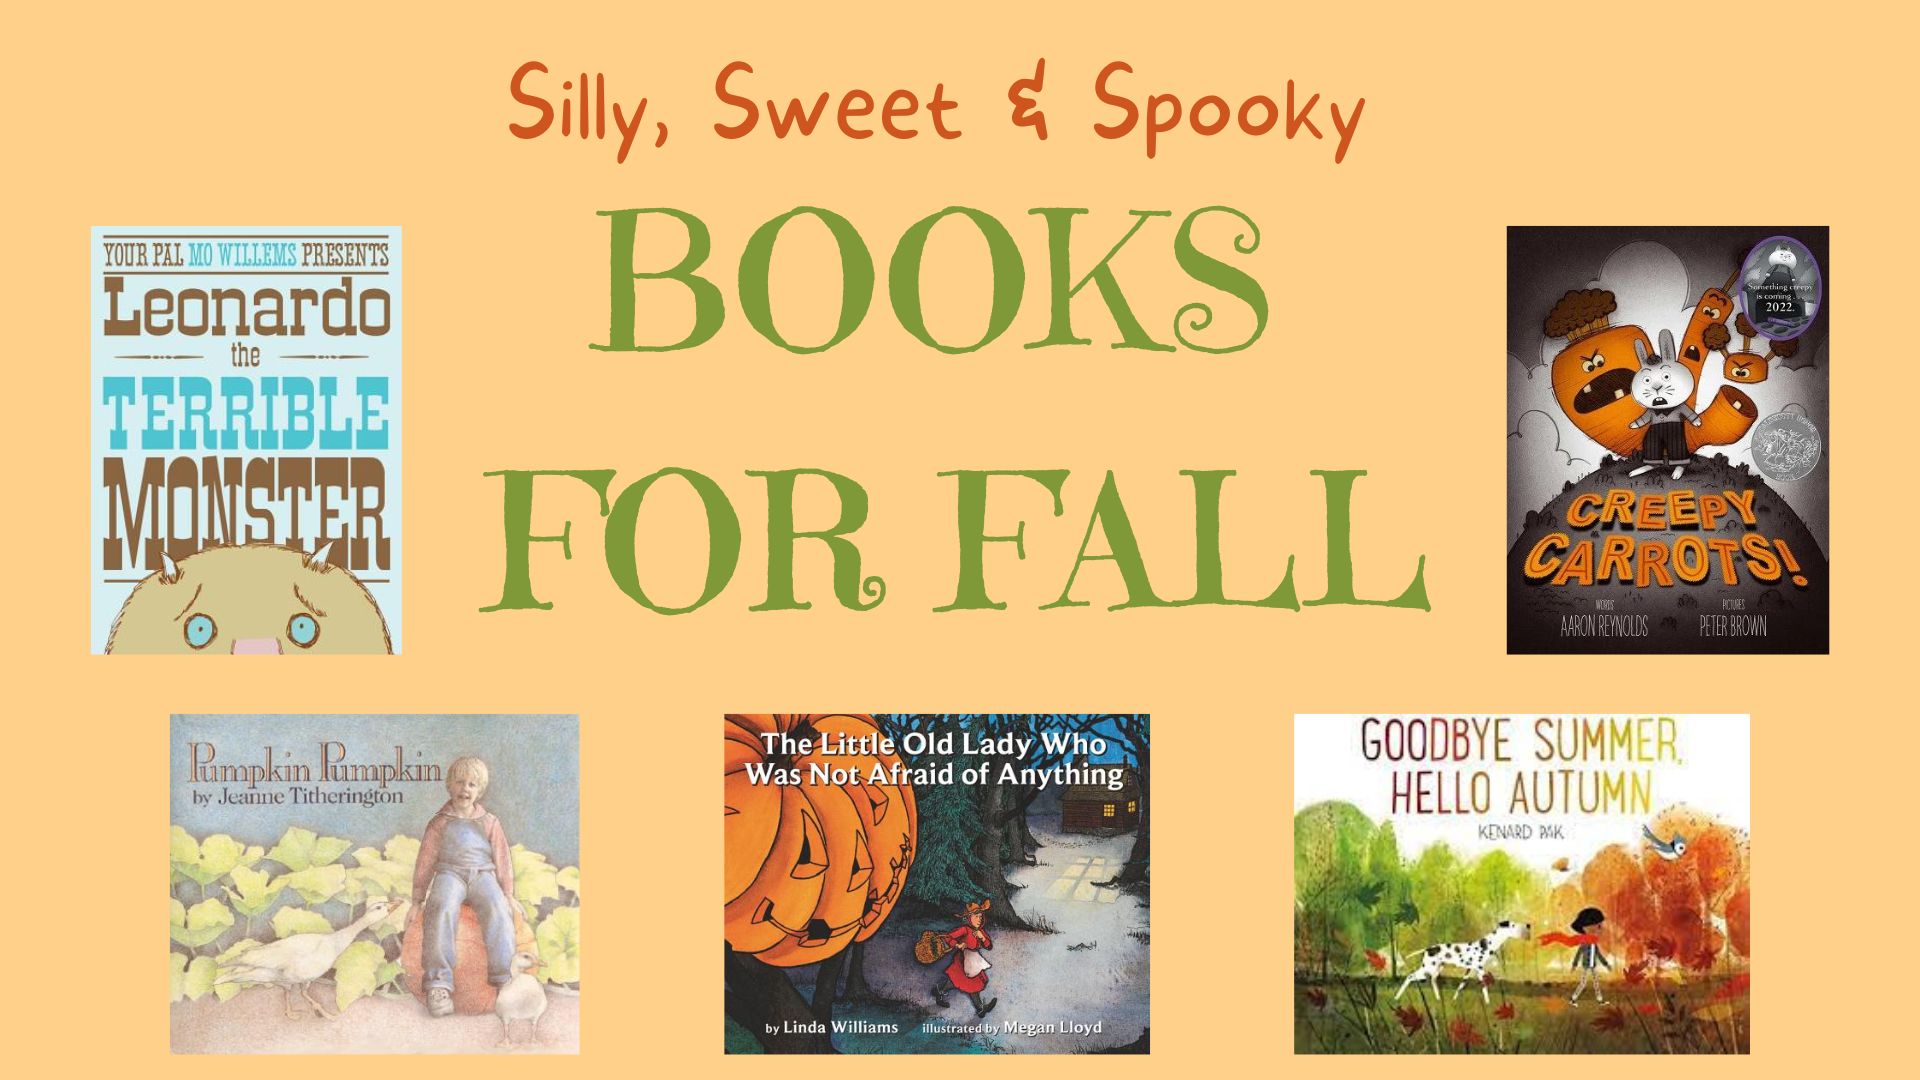 A graphic with the text "Silly, Sweet & Spooky Books for Fall" and the covers of some of the books in this blog post